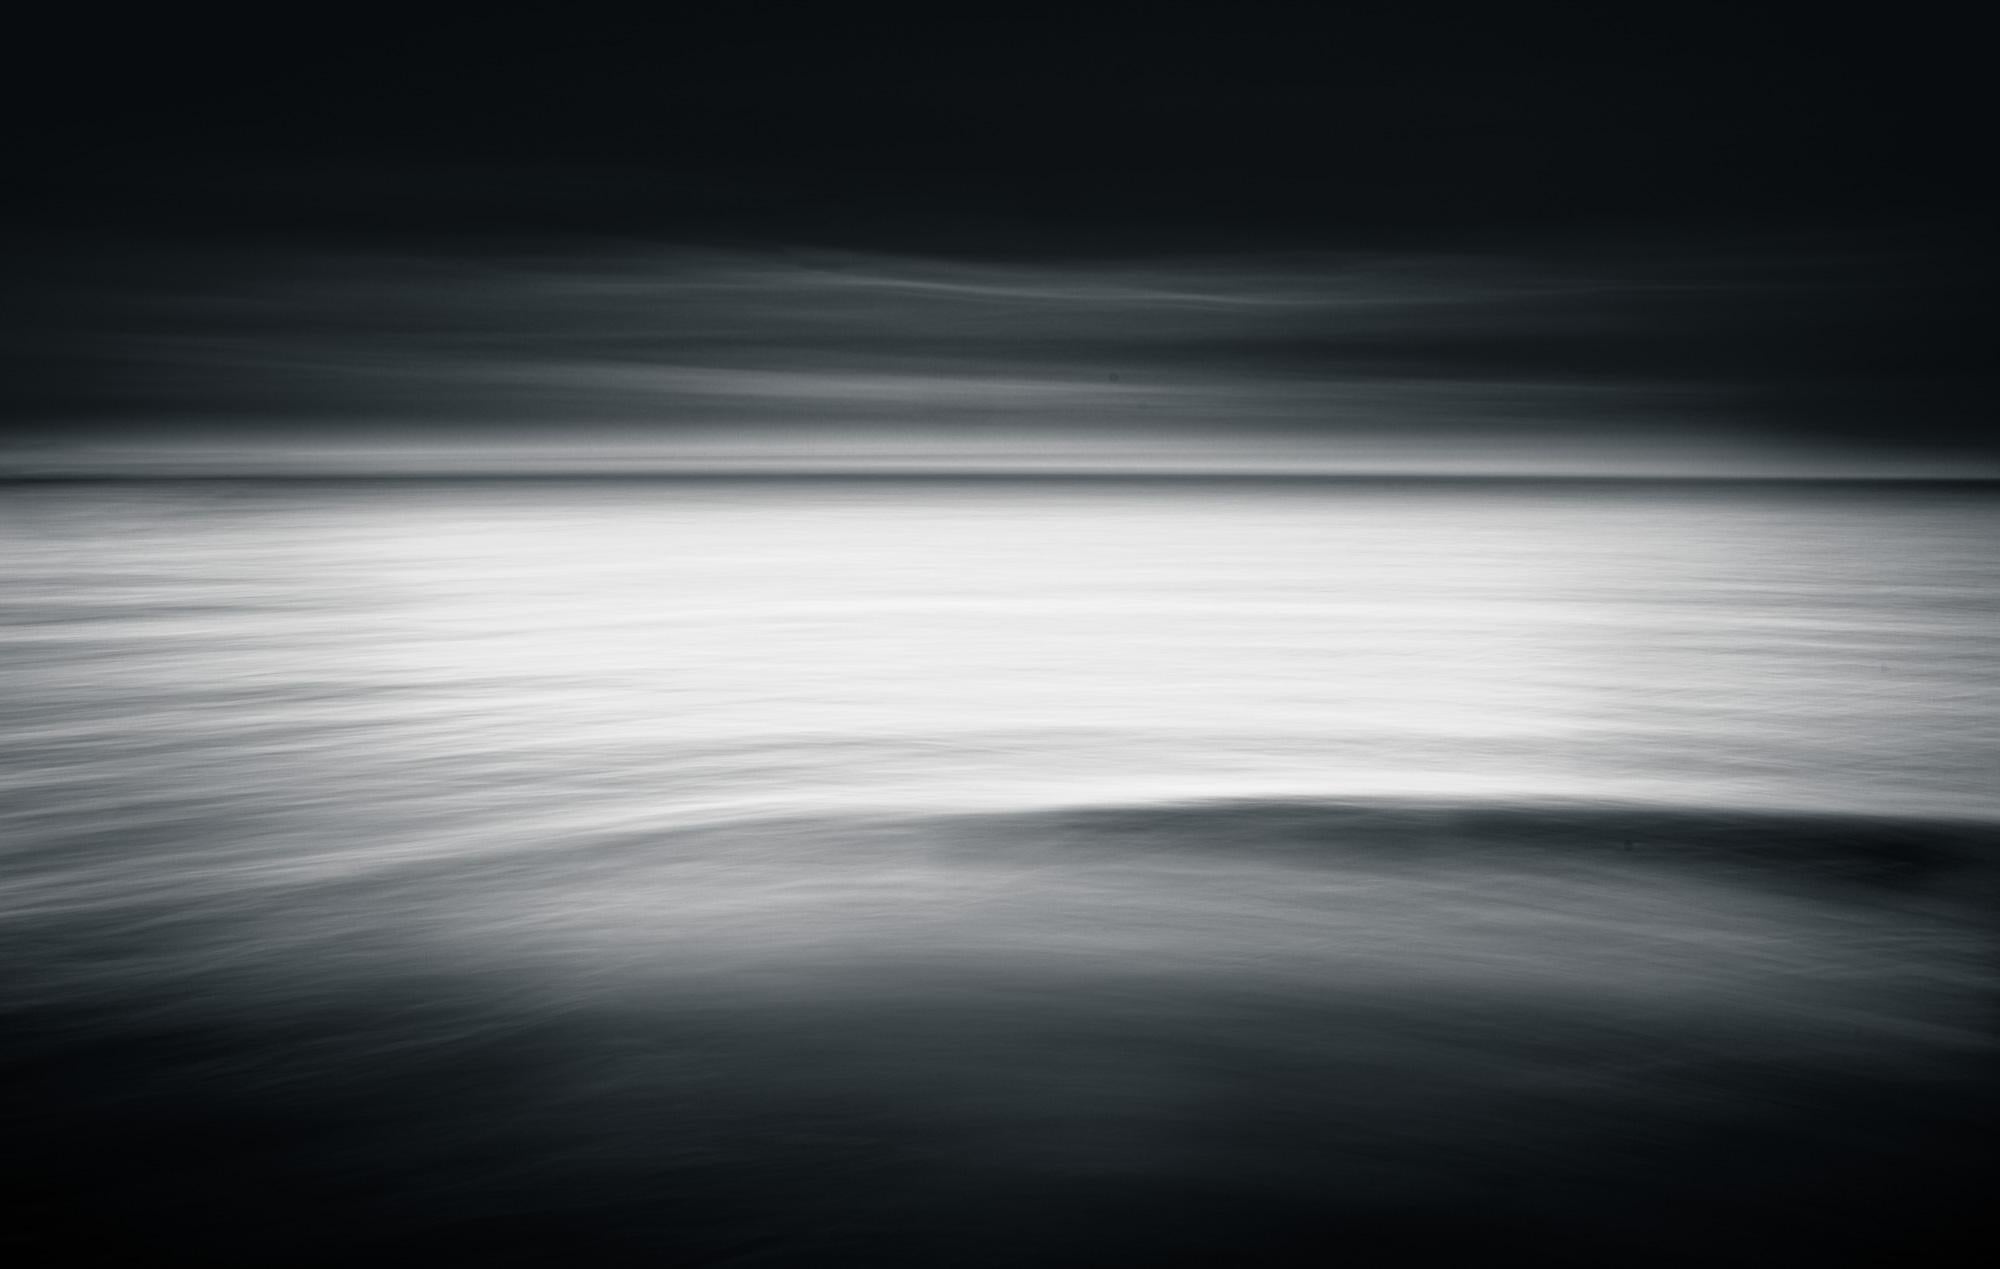 Limited Edition 1 / 3 Black and White Photograph Ocean, Seascape  30 x 40 Untitled #98

This is #98 from the Kinetic Solitude series. It has been shown in the Dow Museum of Fine Arts as part of a exhibition that explored variations on the theme of